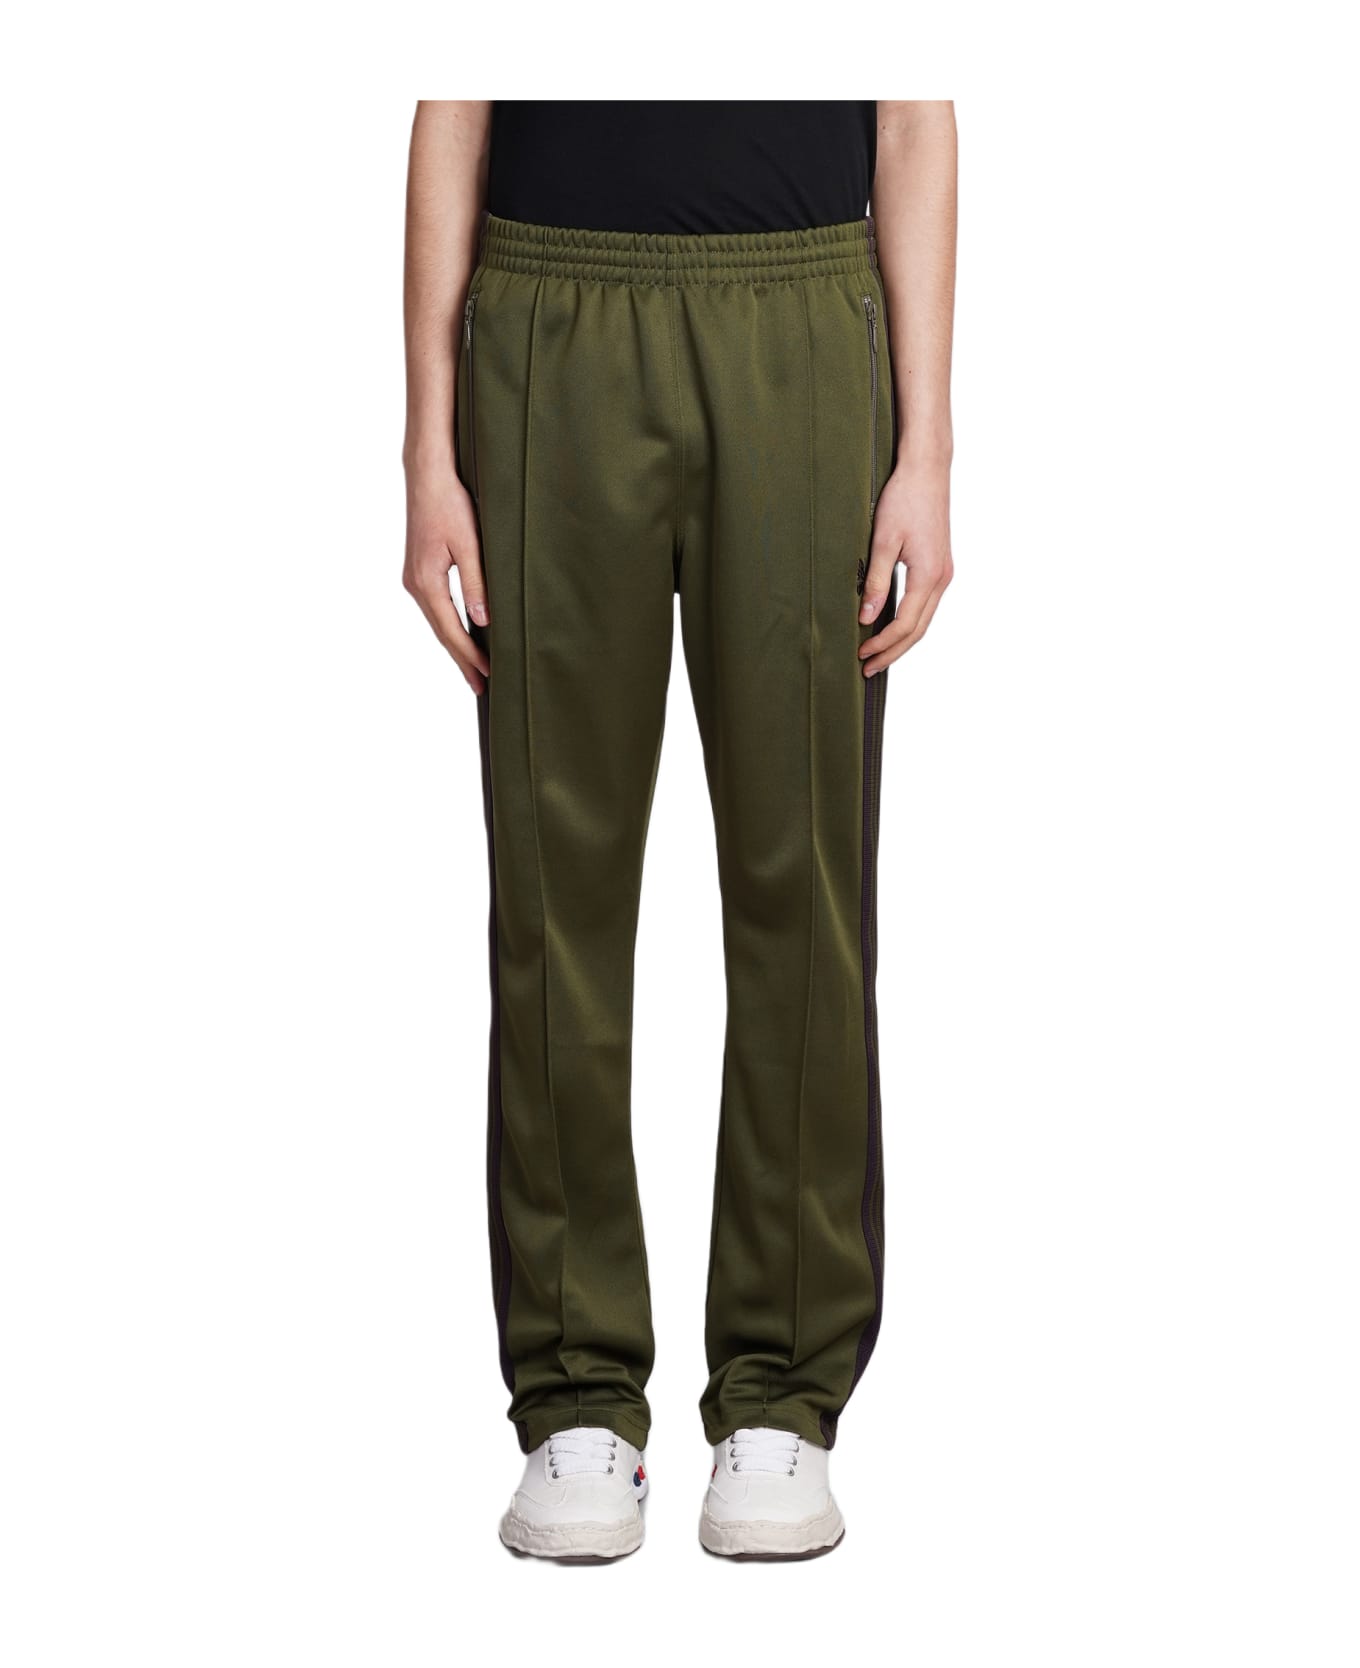 Needles Pants In Green Polyester - green